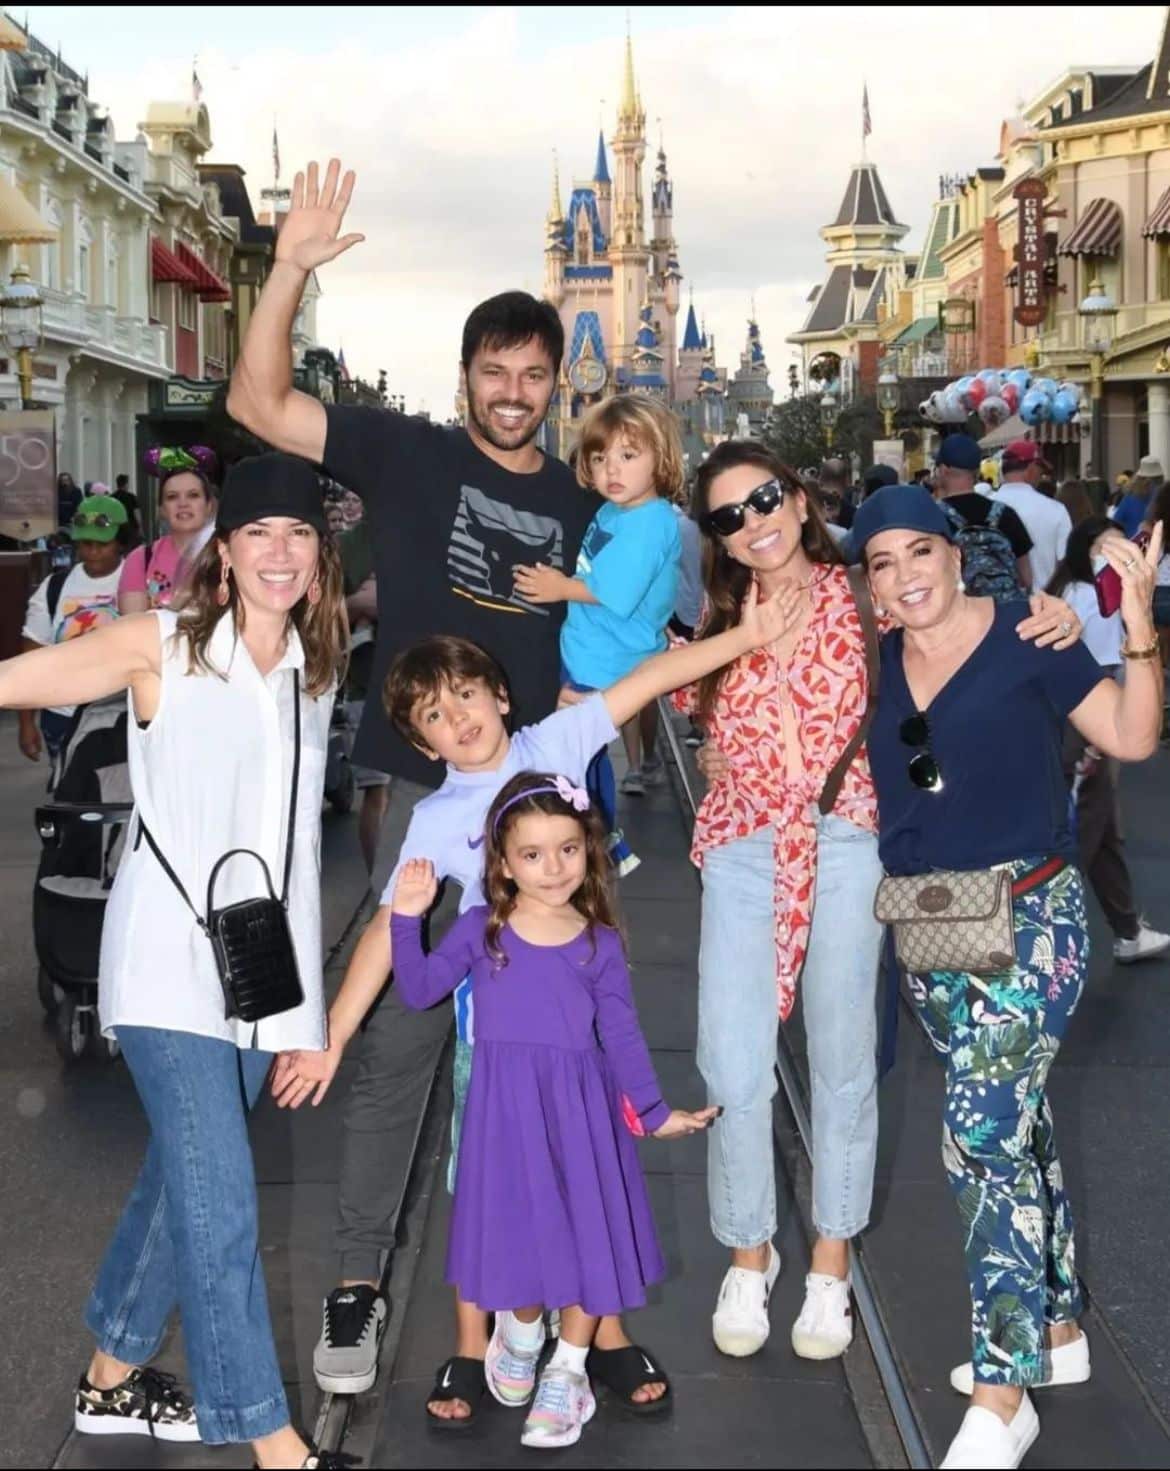 Patricia Abravanal poses with her 3 children and her husband on a trip